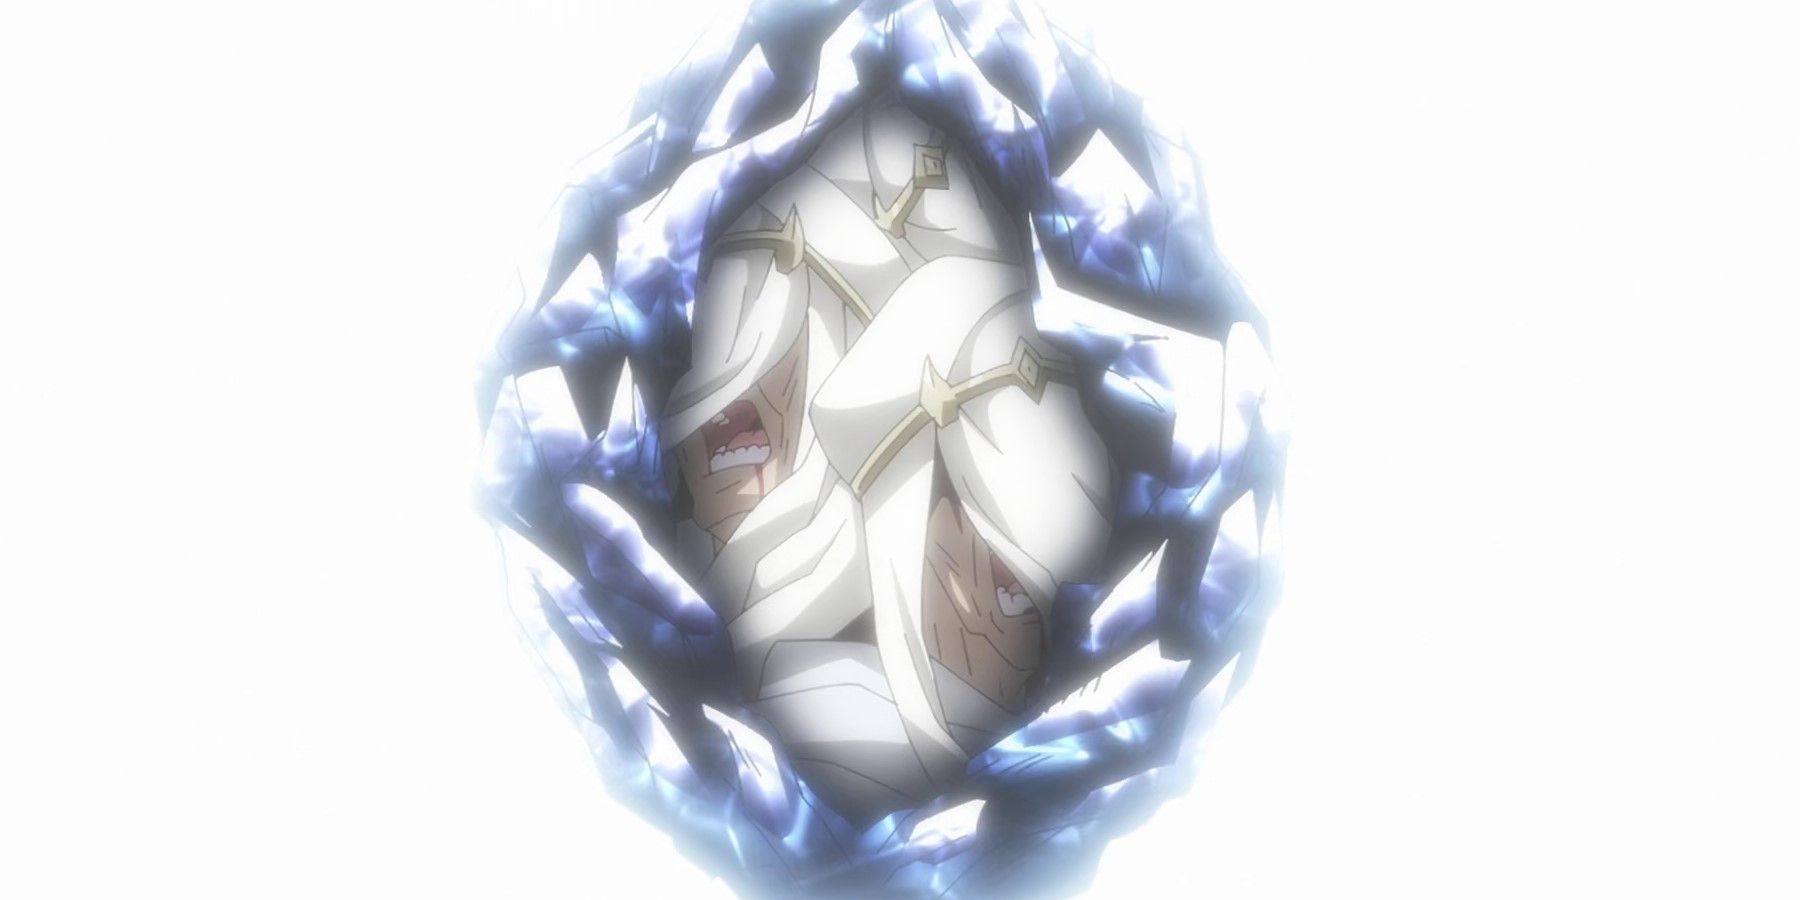 Clerics of The Seven Luminaries Crushed By Despair Time – That Time I Got Reincarnated As A Slime Season 3 Episode 10